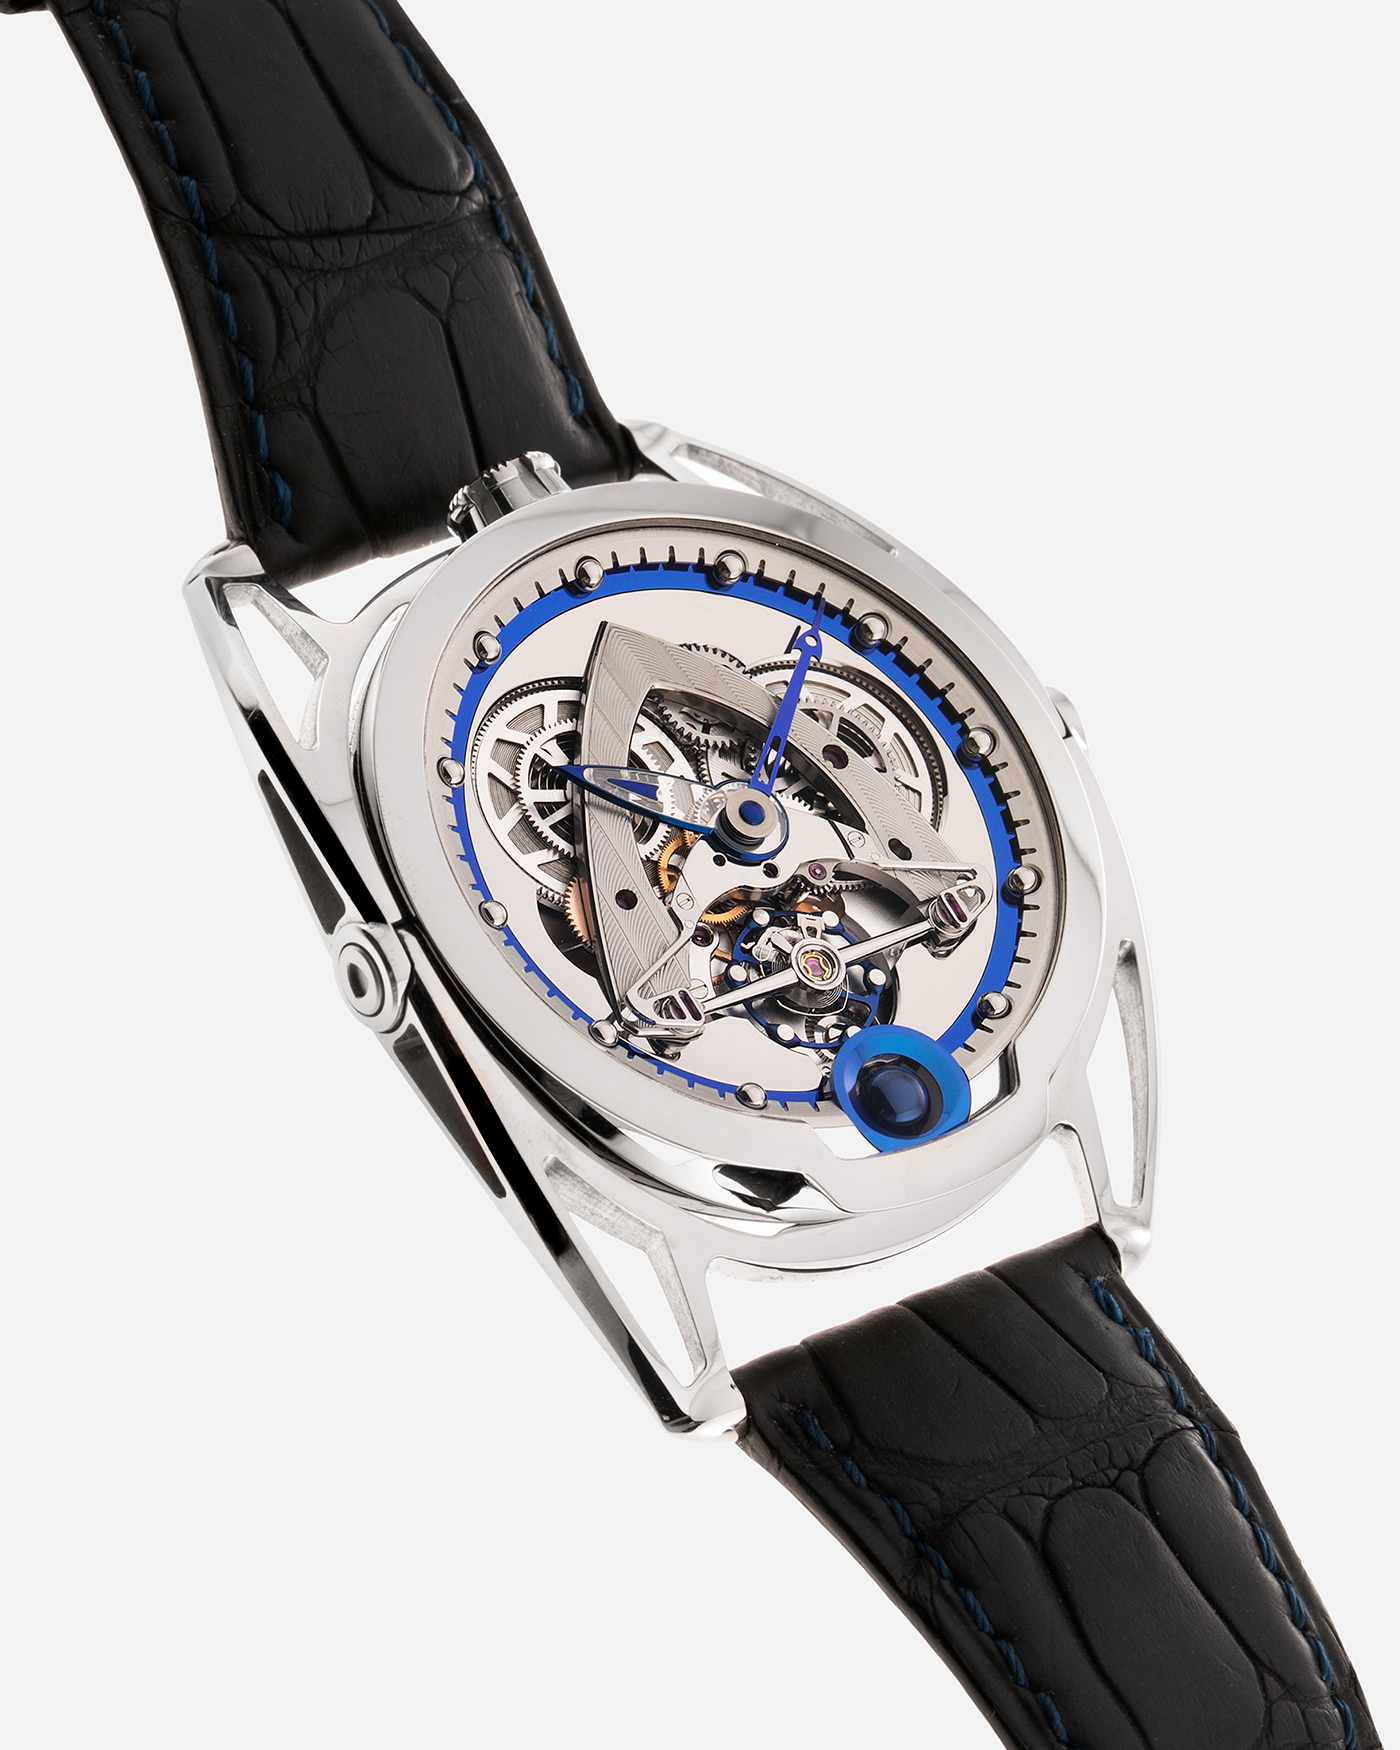 Brand: De Bethune Year: 2020 Model: Steel Wheels Reference: DB28 Material: Titanium Movement: In-House Cal. DB2115V4 Case Diameter: 42.6mm Strap: De Bethune Dark Blue Alligator with Titanium Tang Buckle 